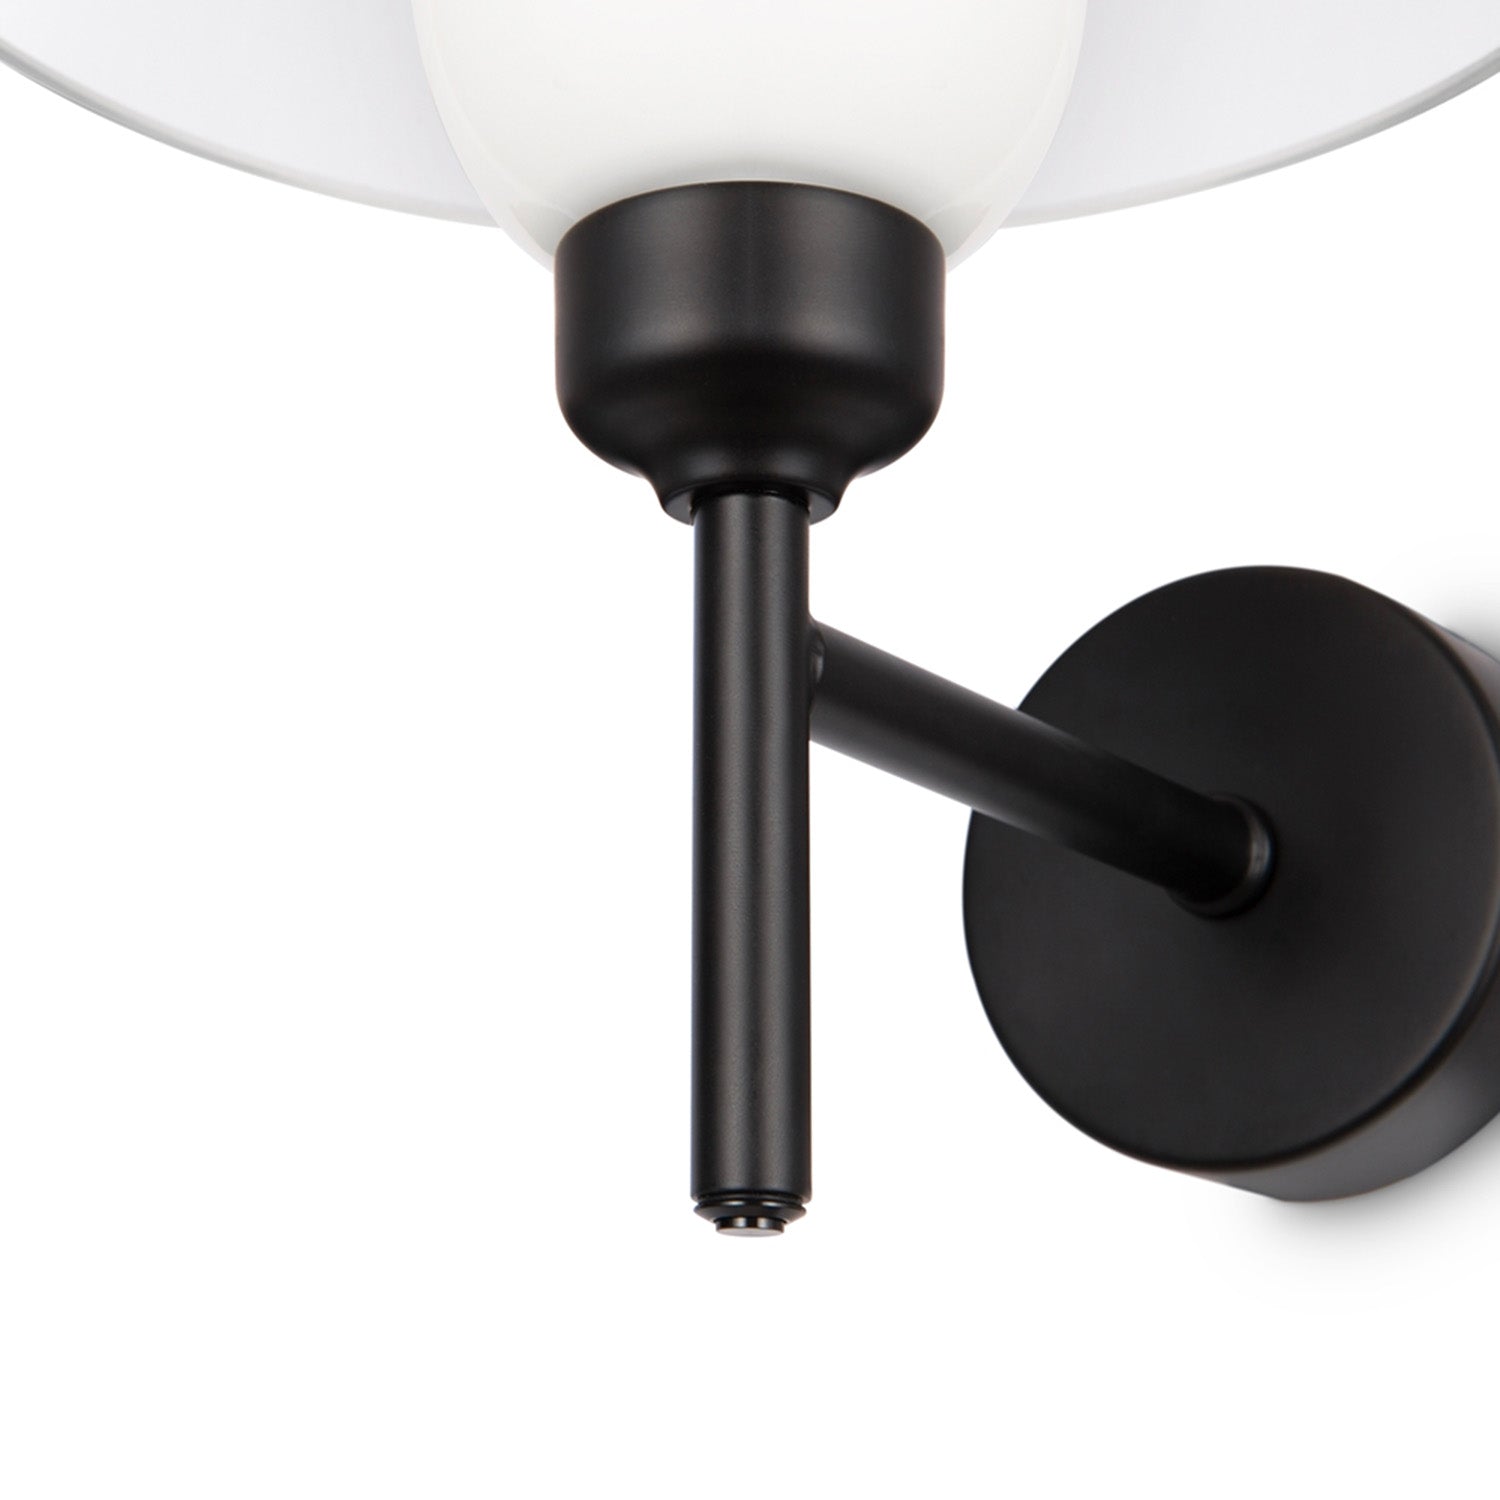 MEMORY - Chic black wall light and white glass dome